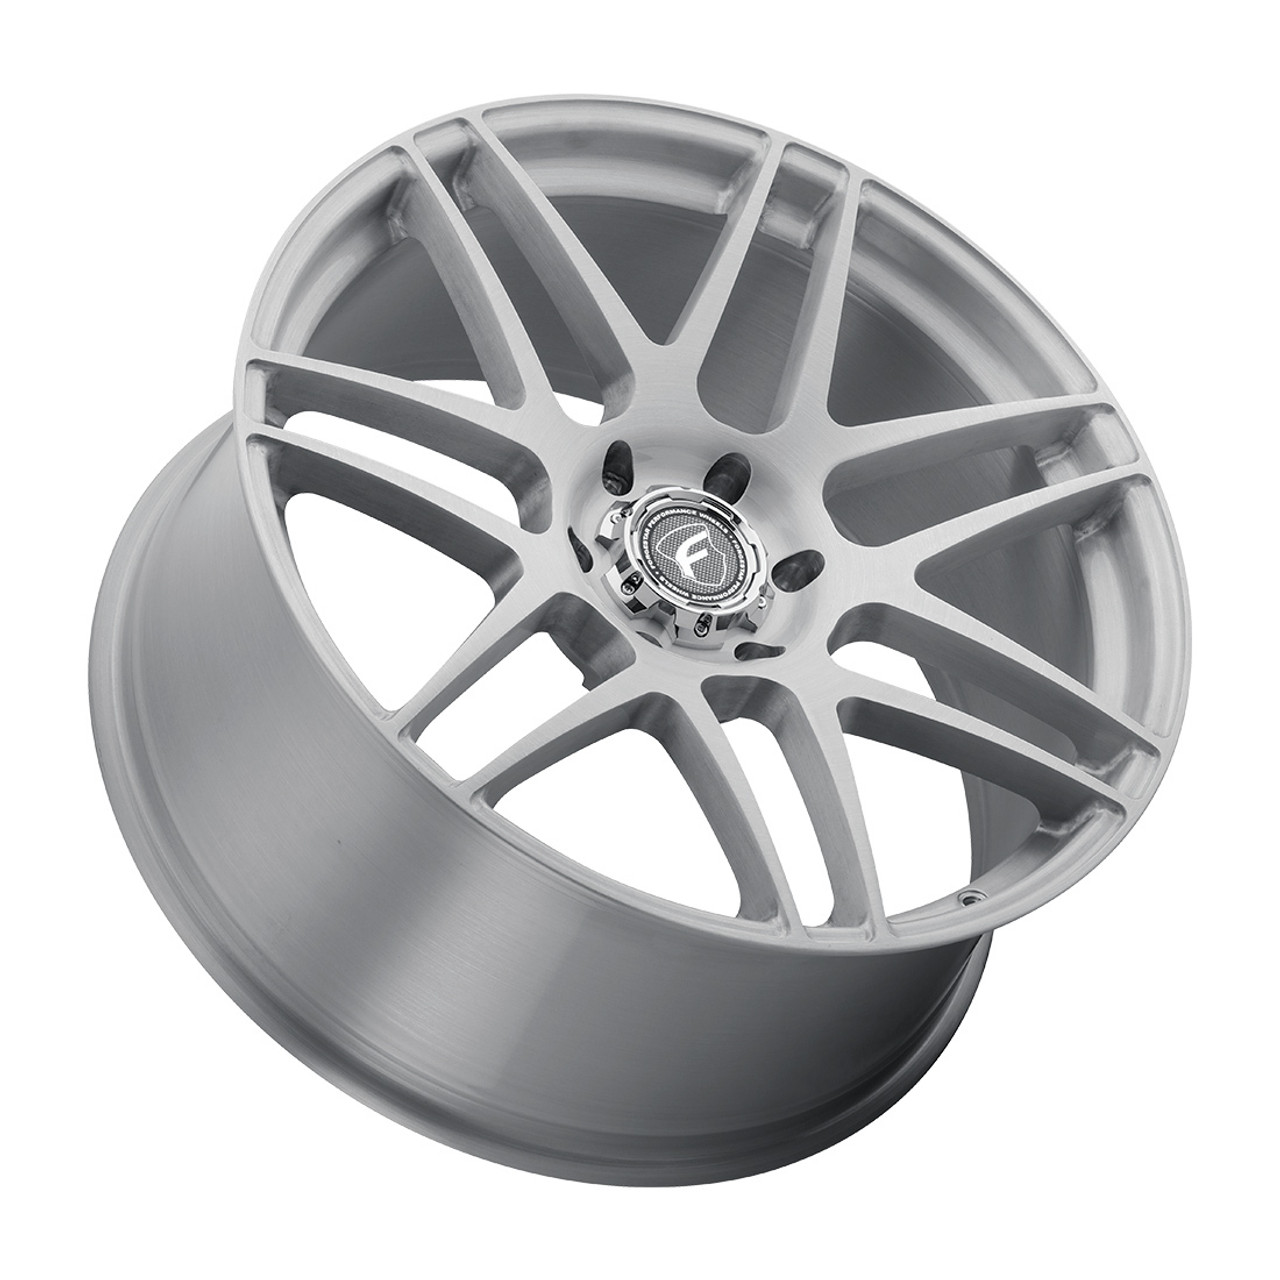 Forgestar X14 Wheel - 22x10 / 6x139.7 / +30 Offset / Super Deep Concave - Gloss Brushed